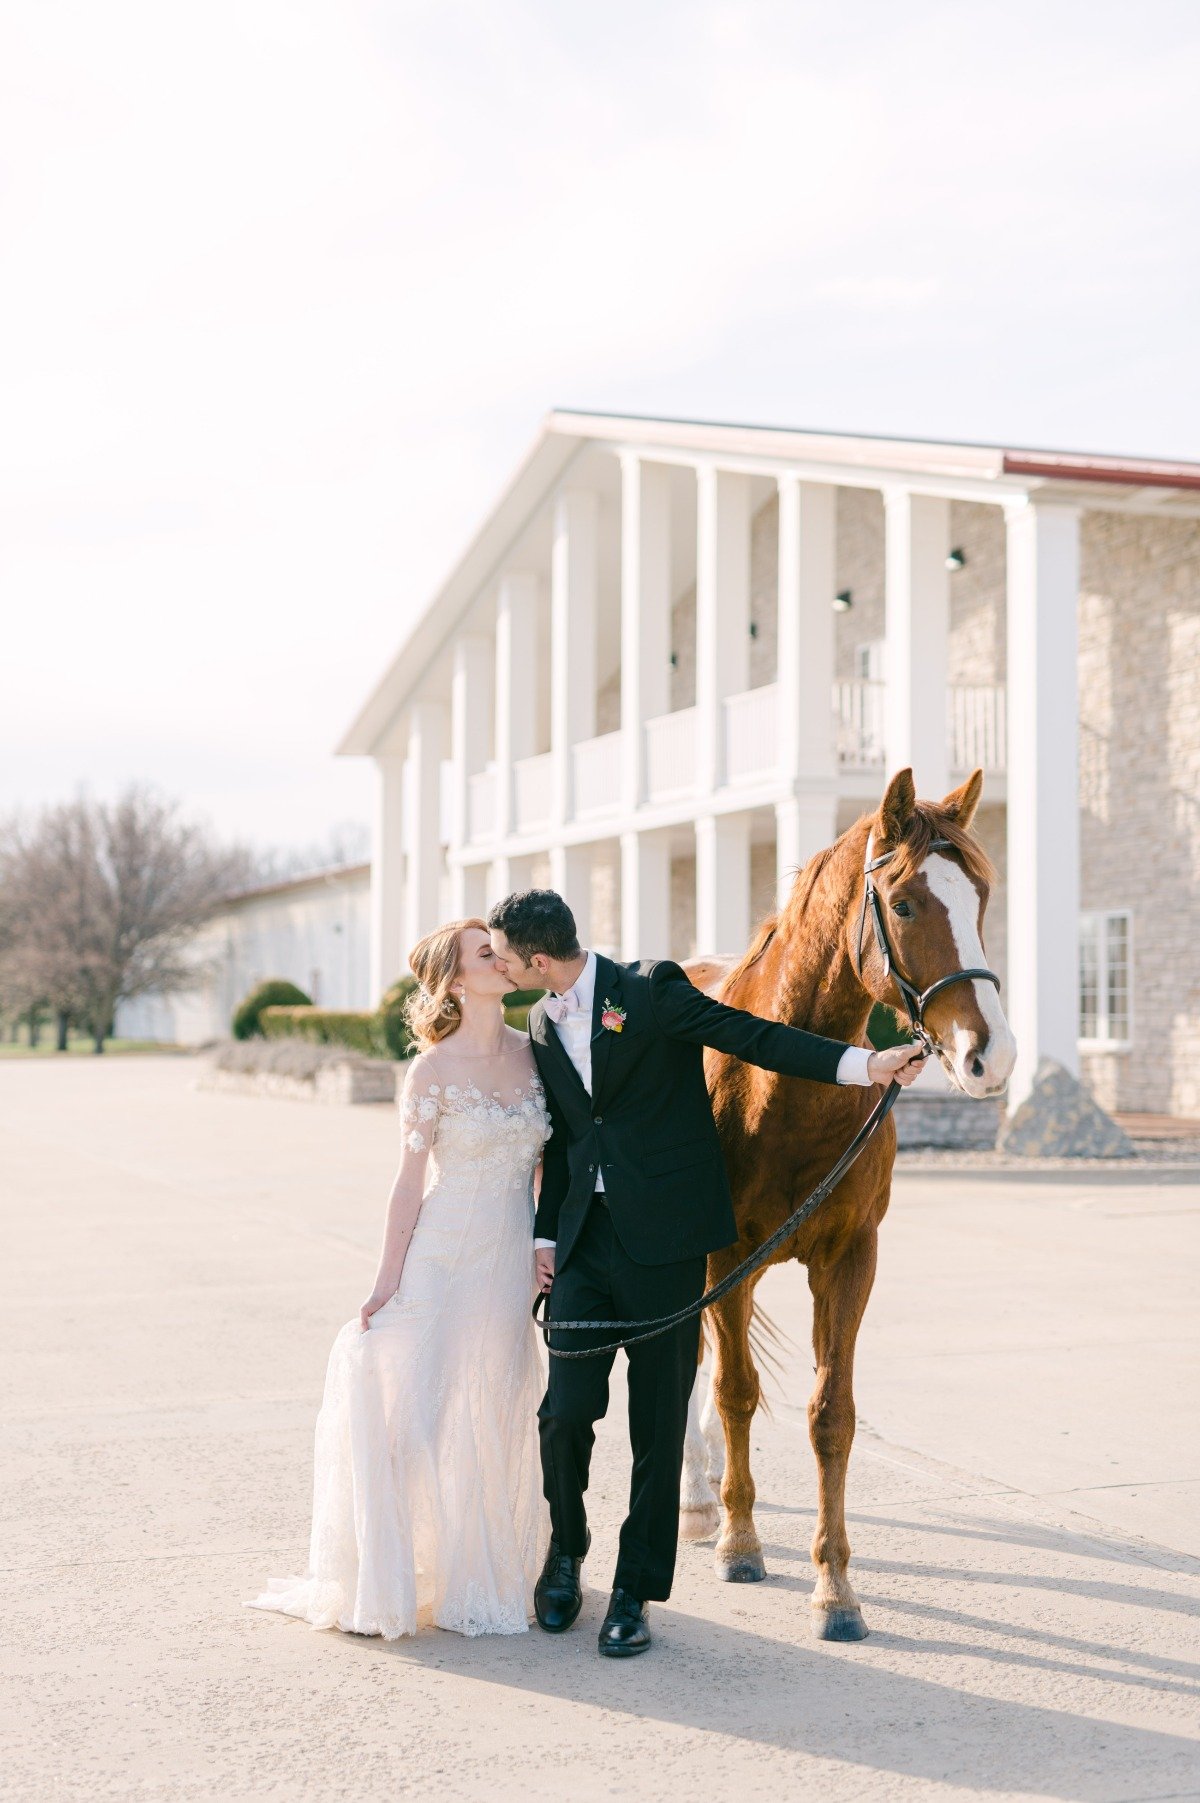 Bride and groom with their horse